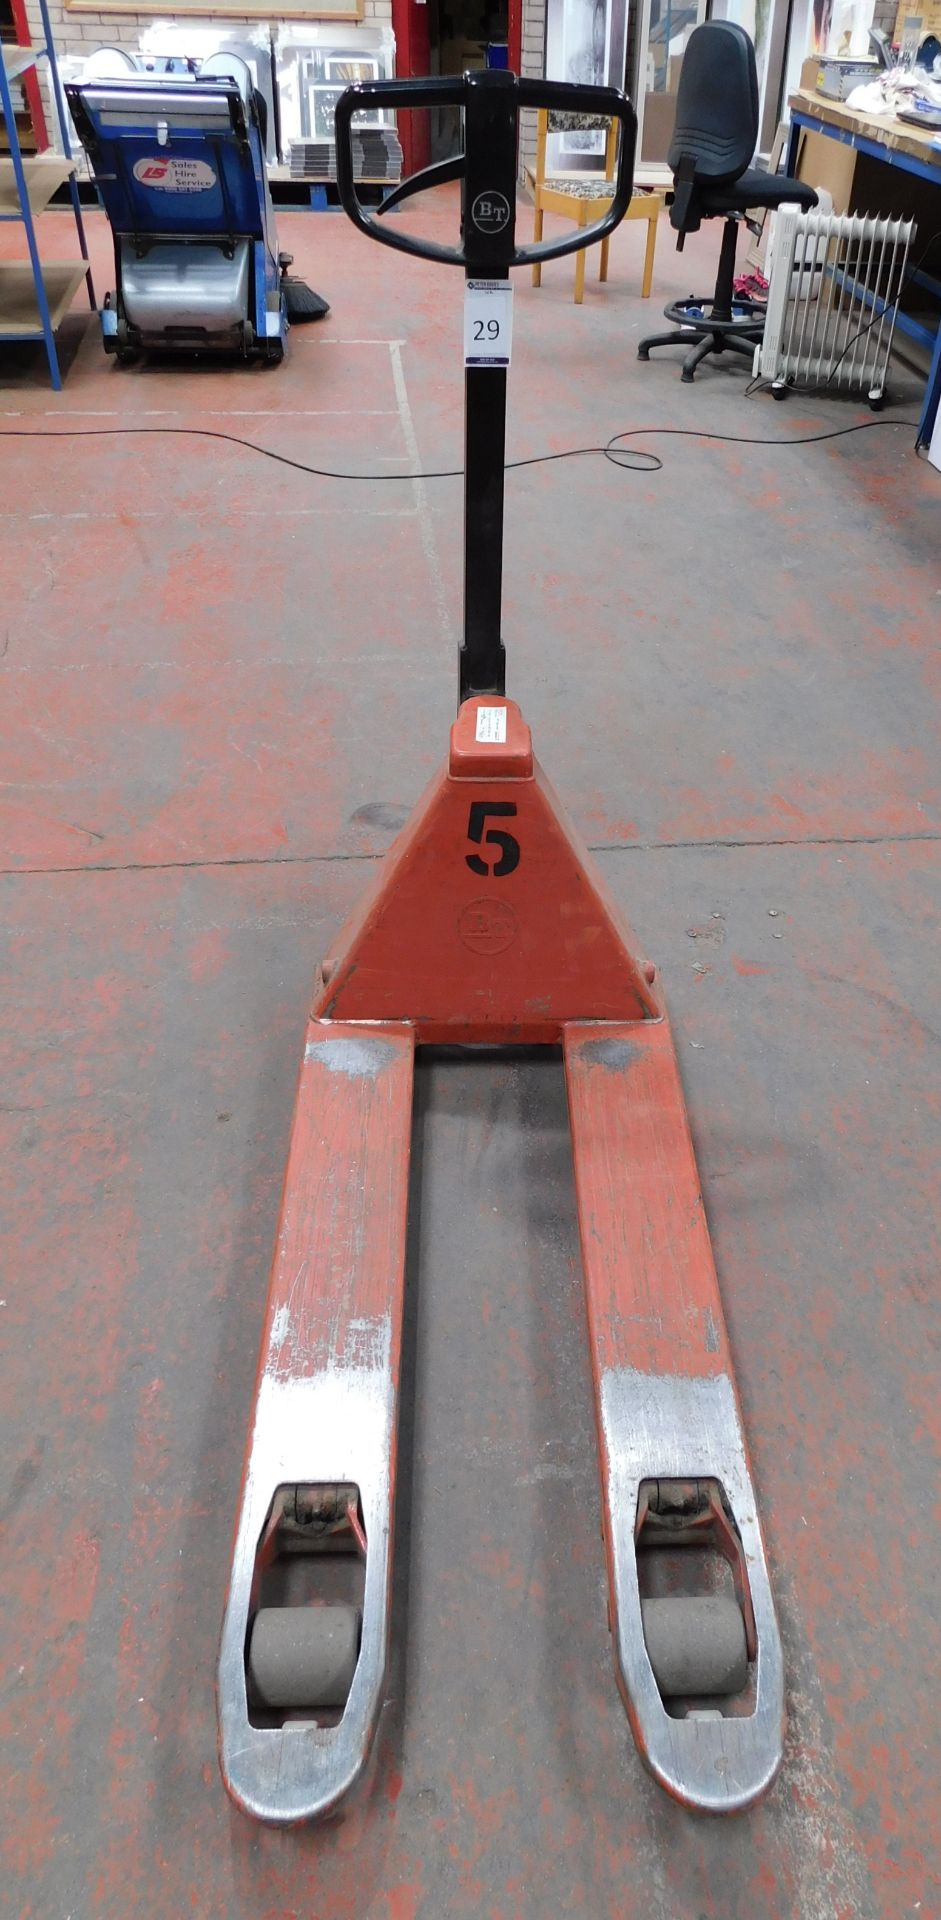 Narrow Blade BT Rolatruc Pallet Truck (Collection – Friday 25th, Tuesday 29th or Wednesday 30th